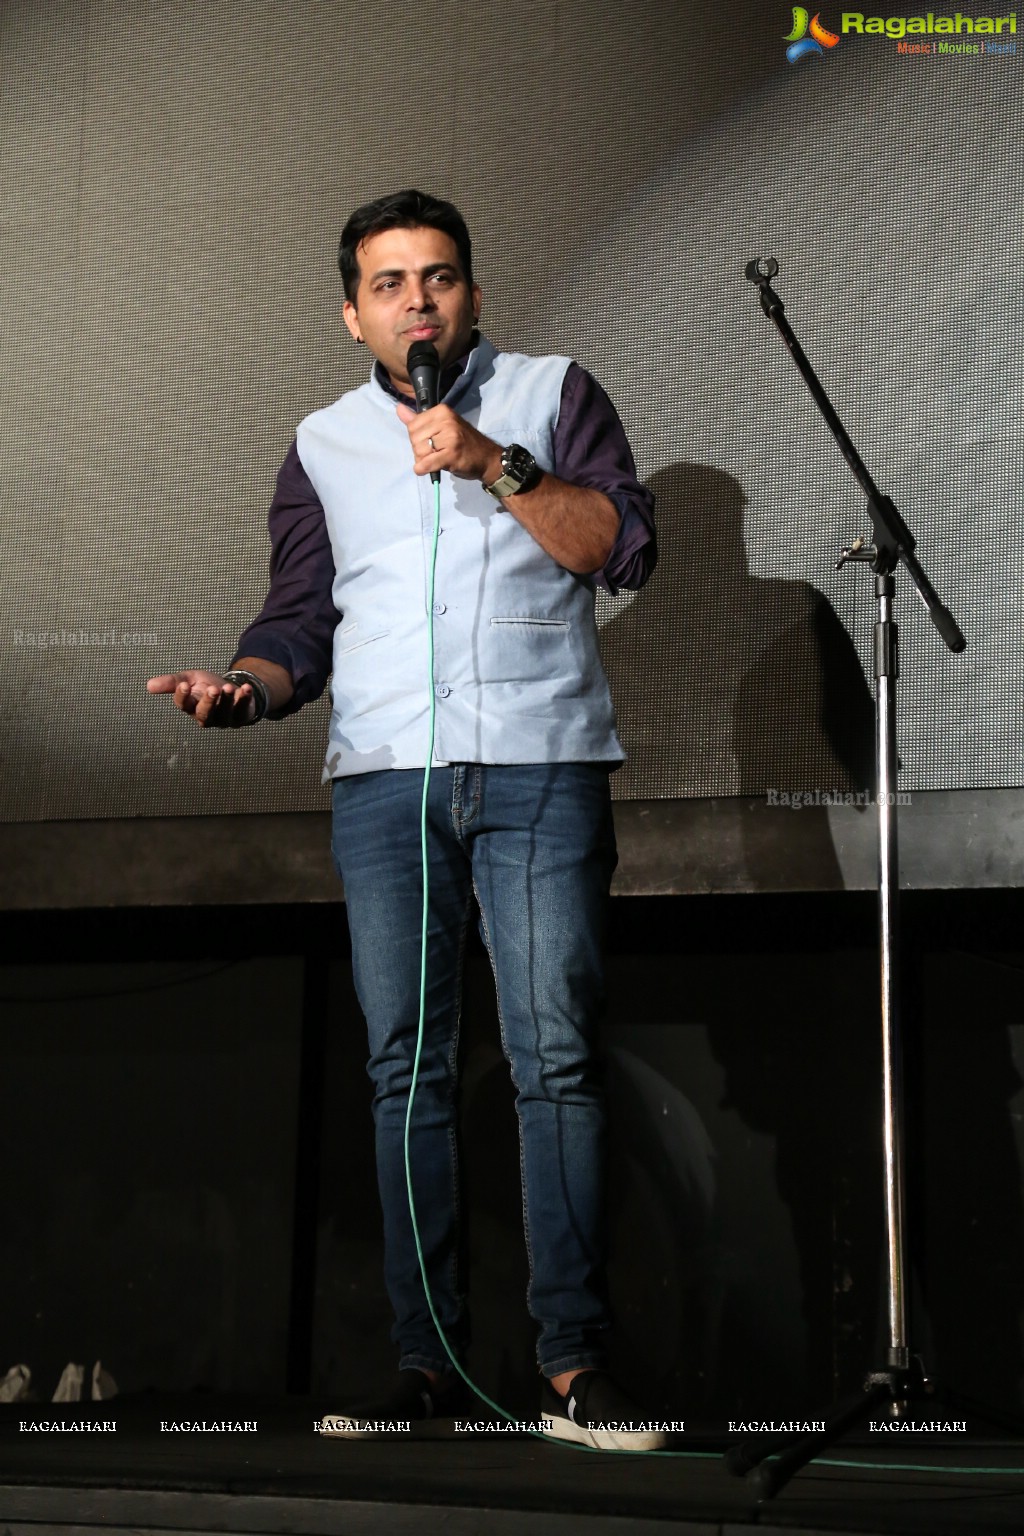 Amit Tandon's Stand-Up Comedy at Heart Cup Cafe, Hyderabad